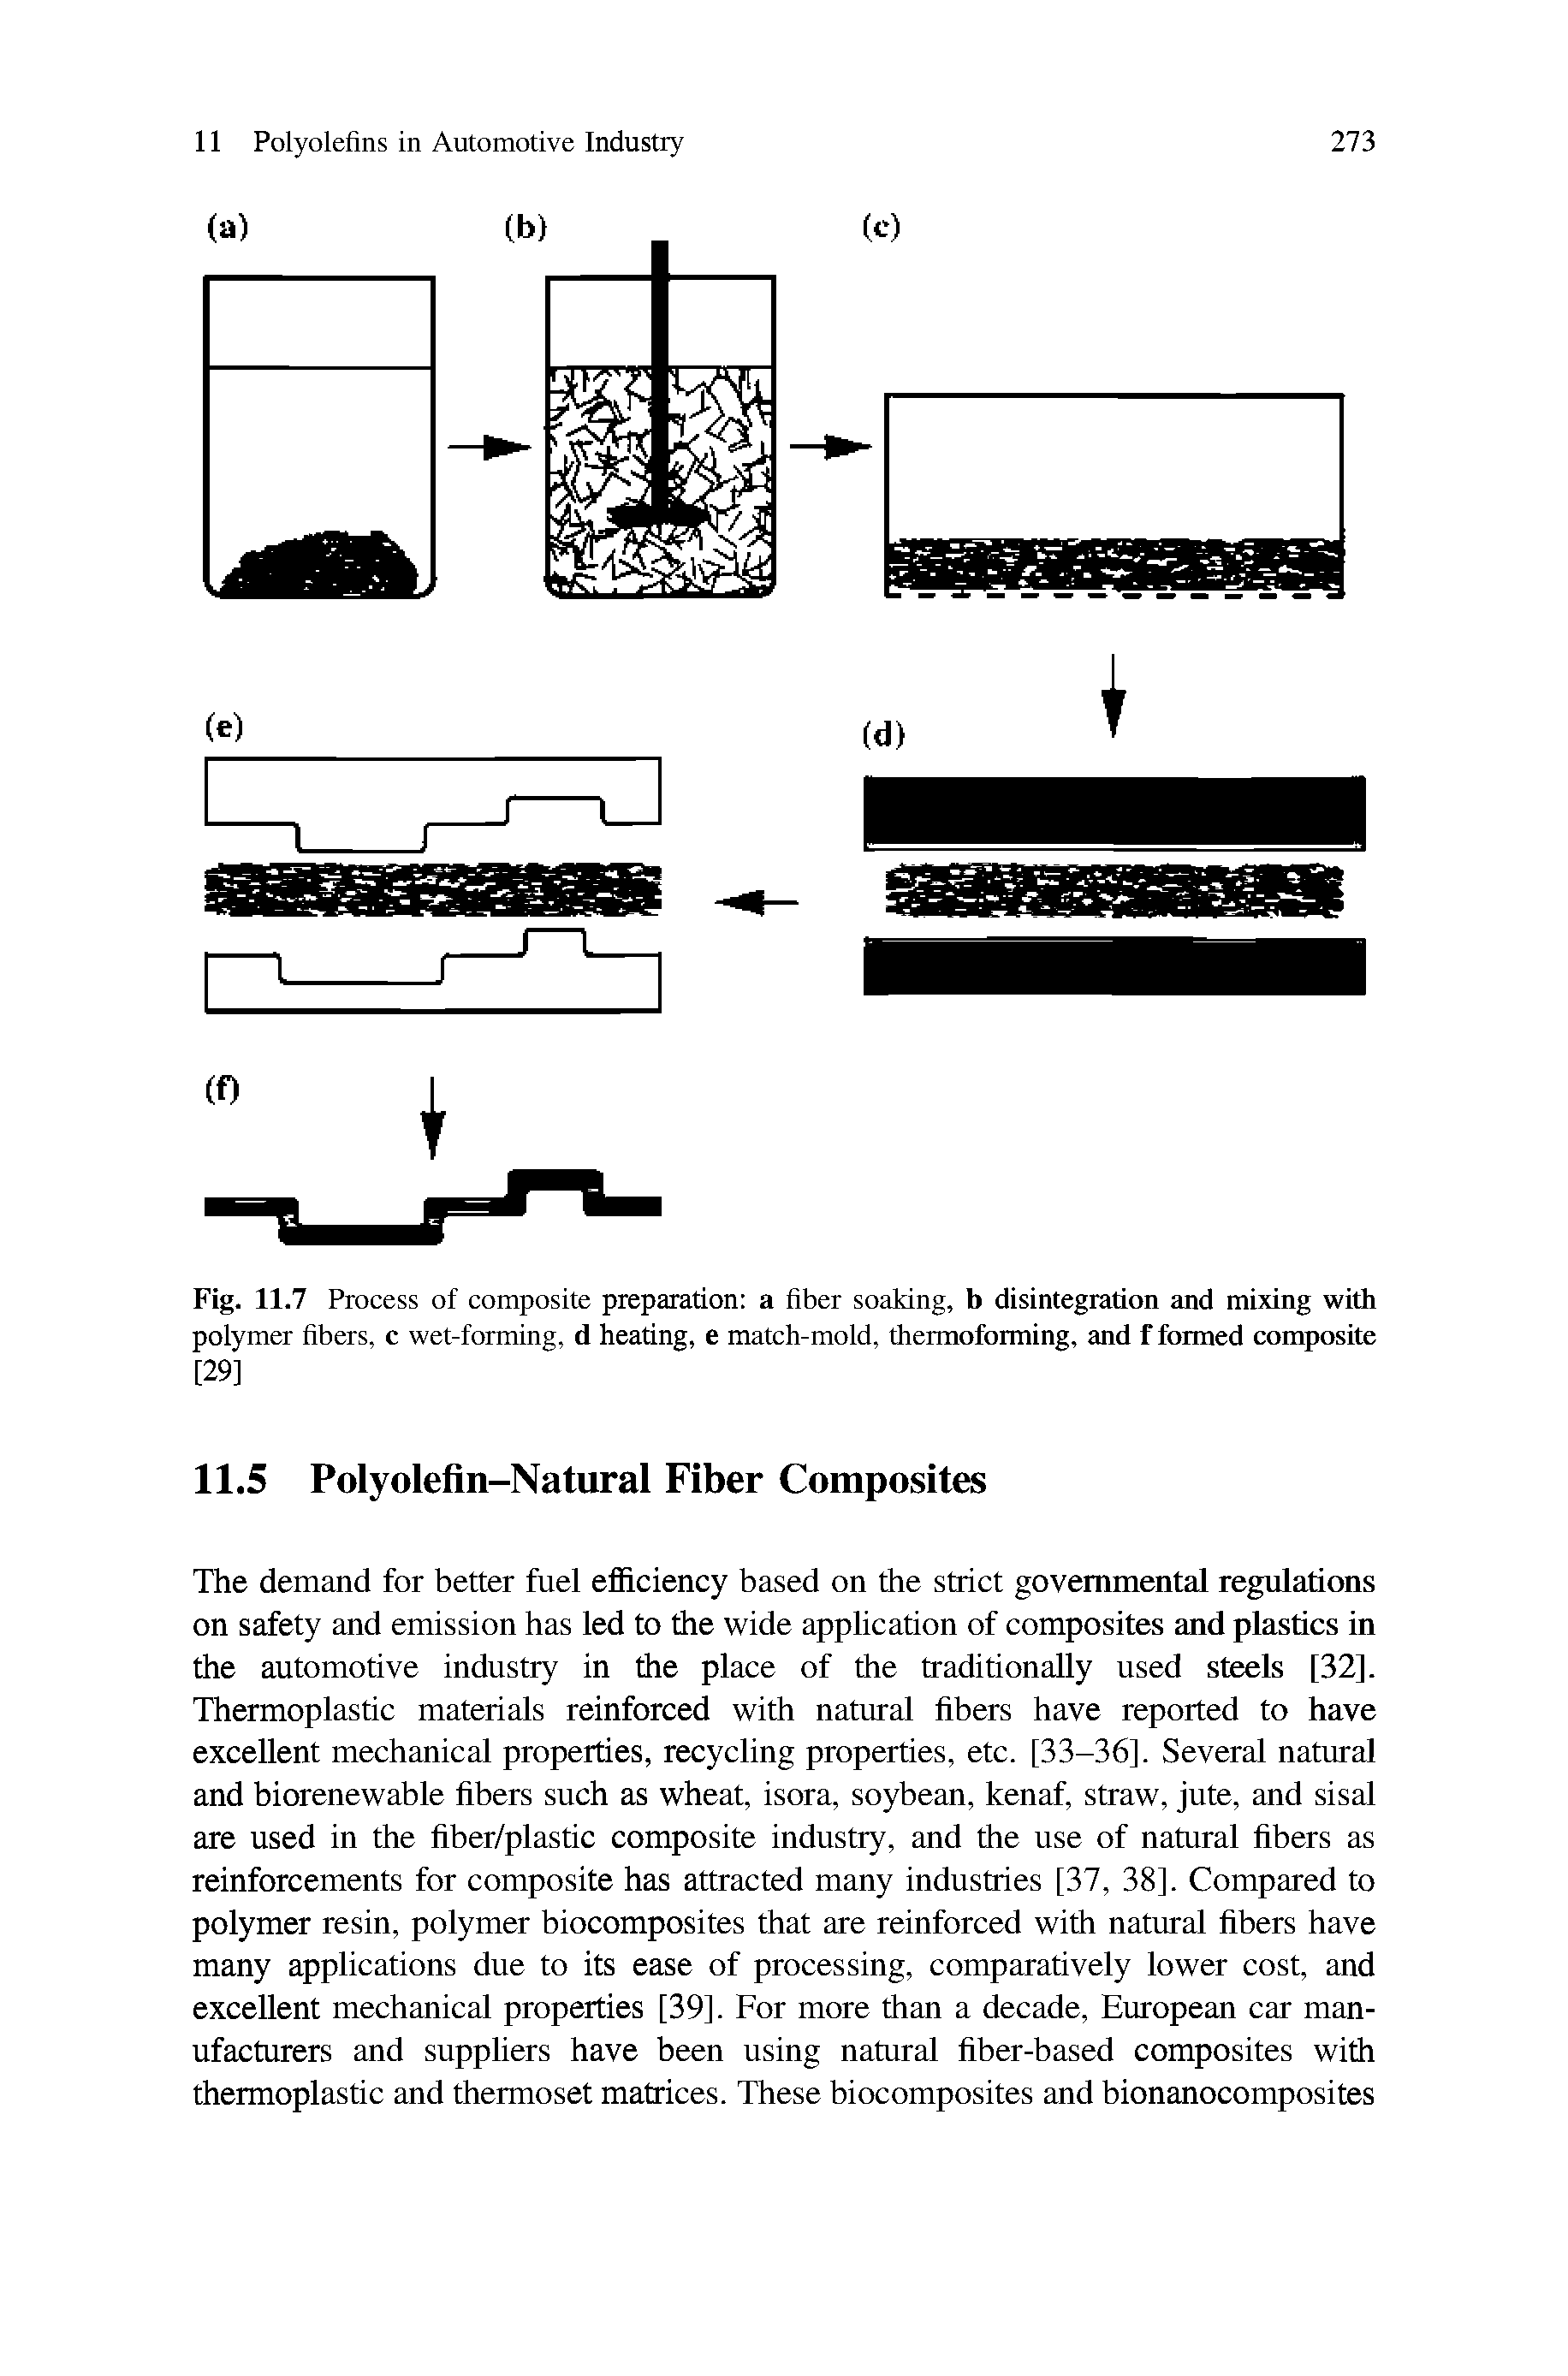 Fig. 11.7 Process of composite preparation a fiber soaking, b disintegration and mixing with polymer fibers, c wet-forming, d heating, e match-mold, thermoforming, and f formed composite [29]...